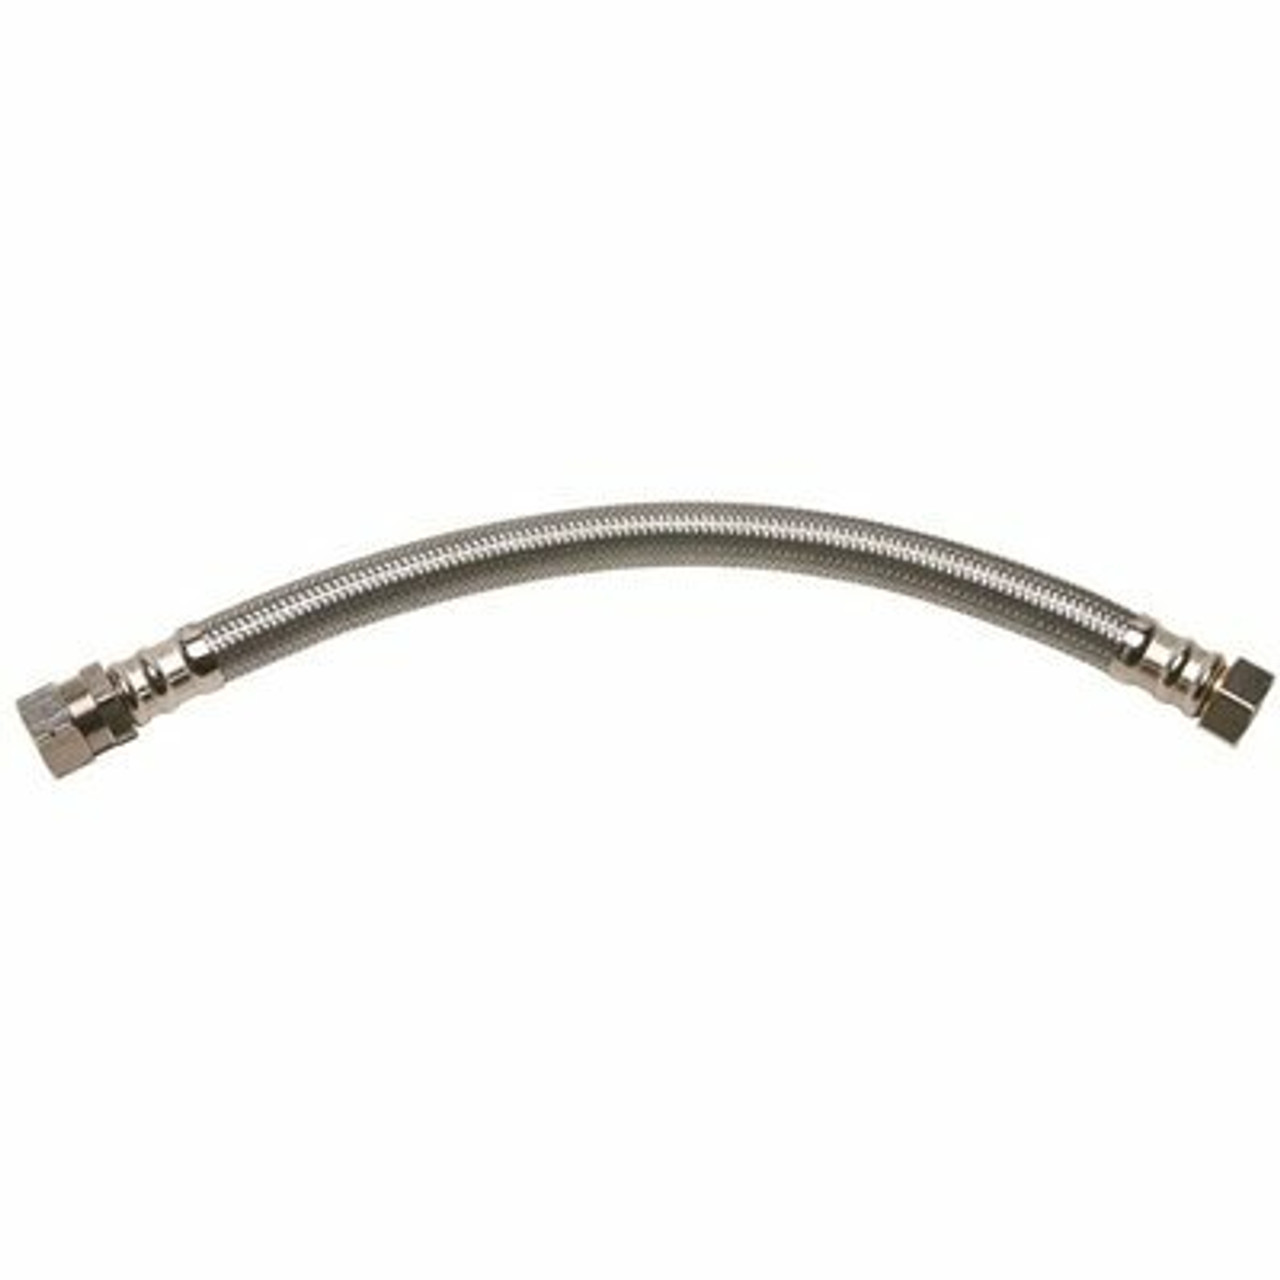 Fluidmaster 3/4 In. F.I.P. X 3/4 In. Compression X 18 In. L Braided Stainless Steel Water Heater Connector